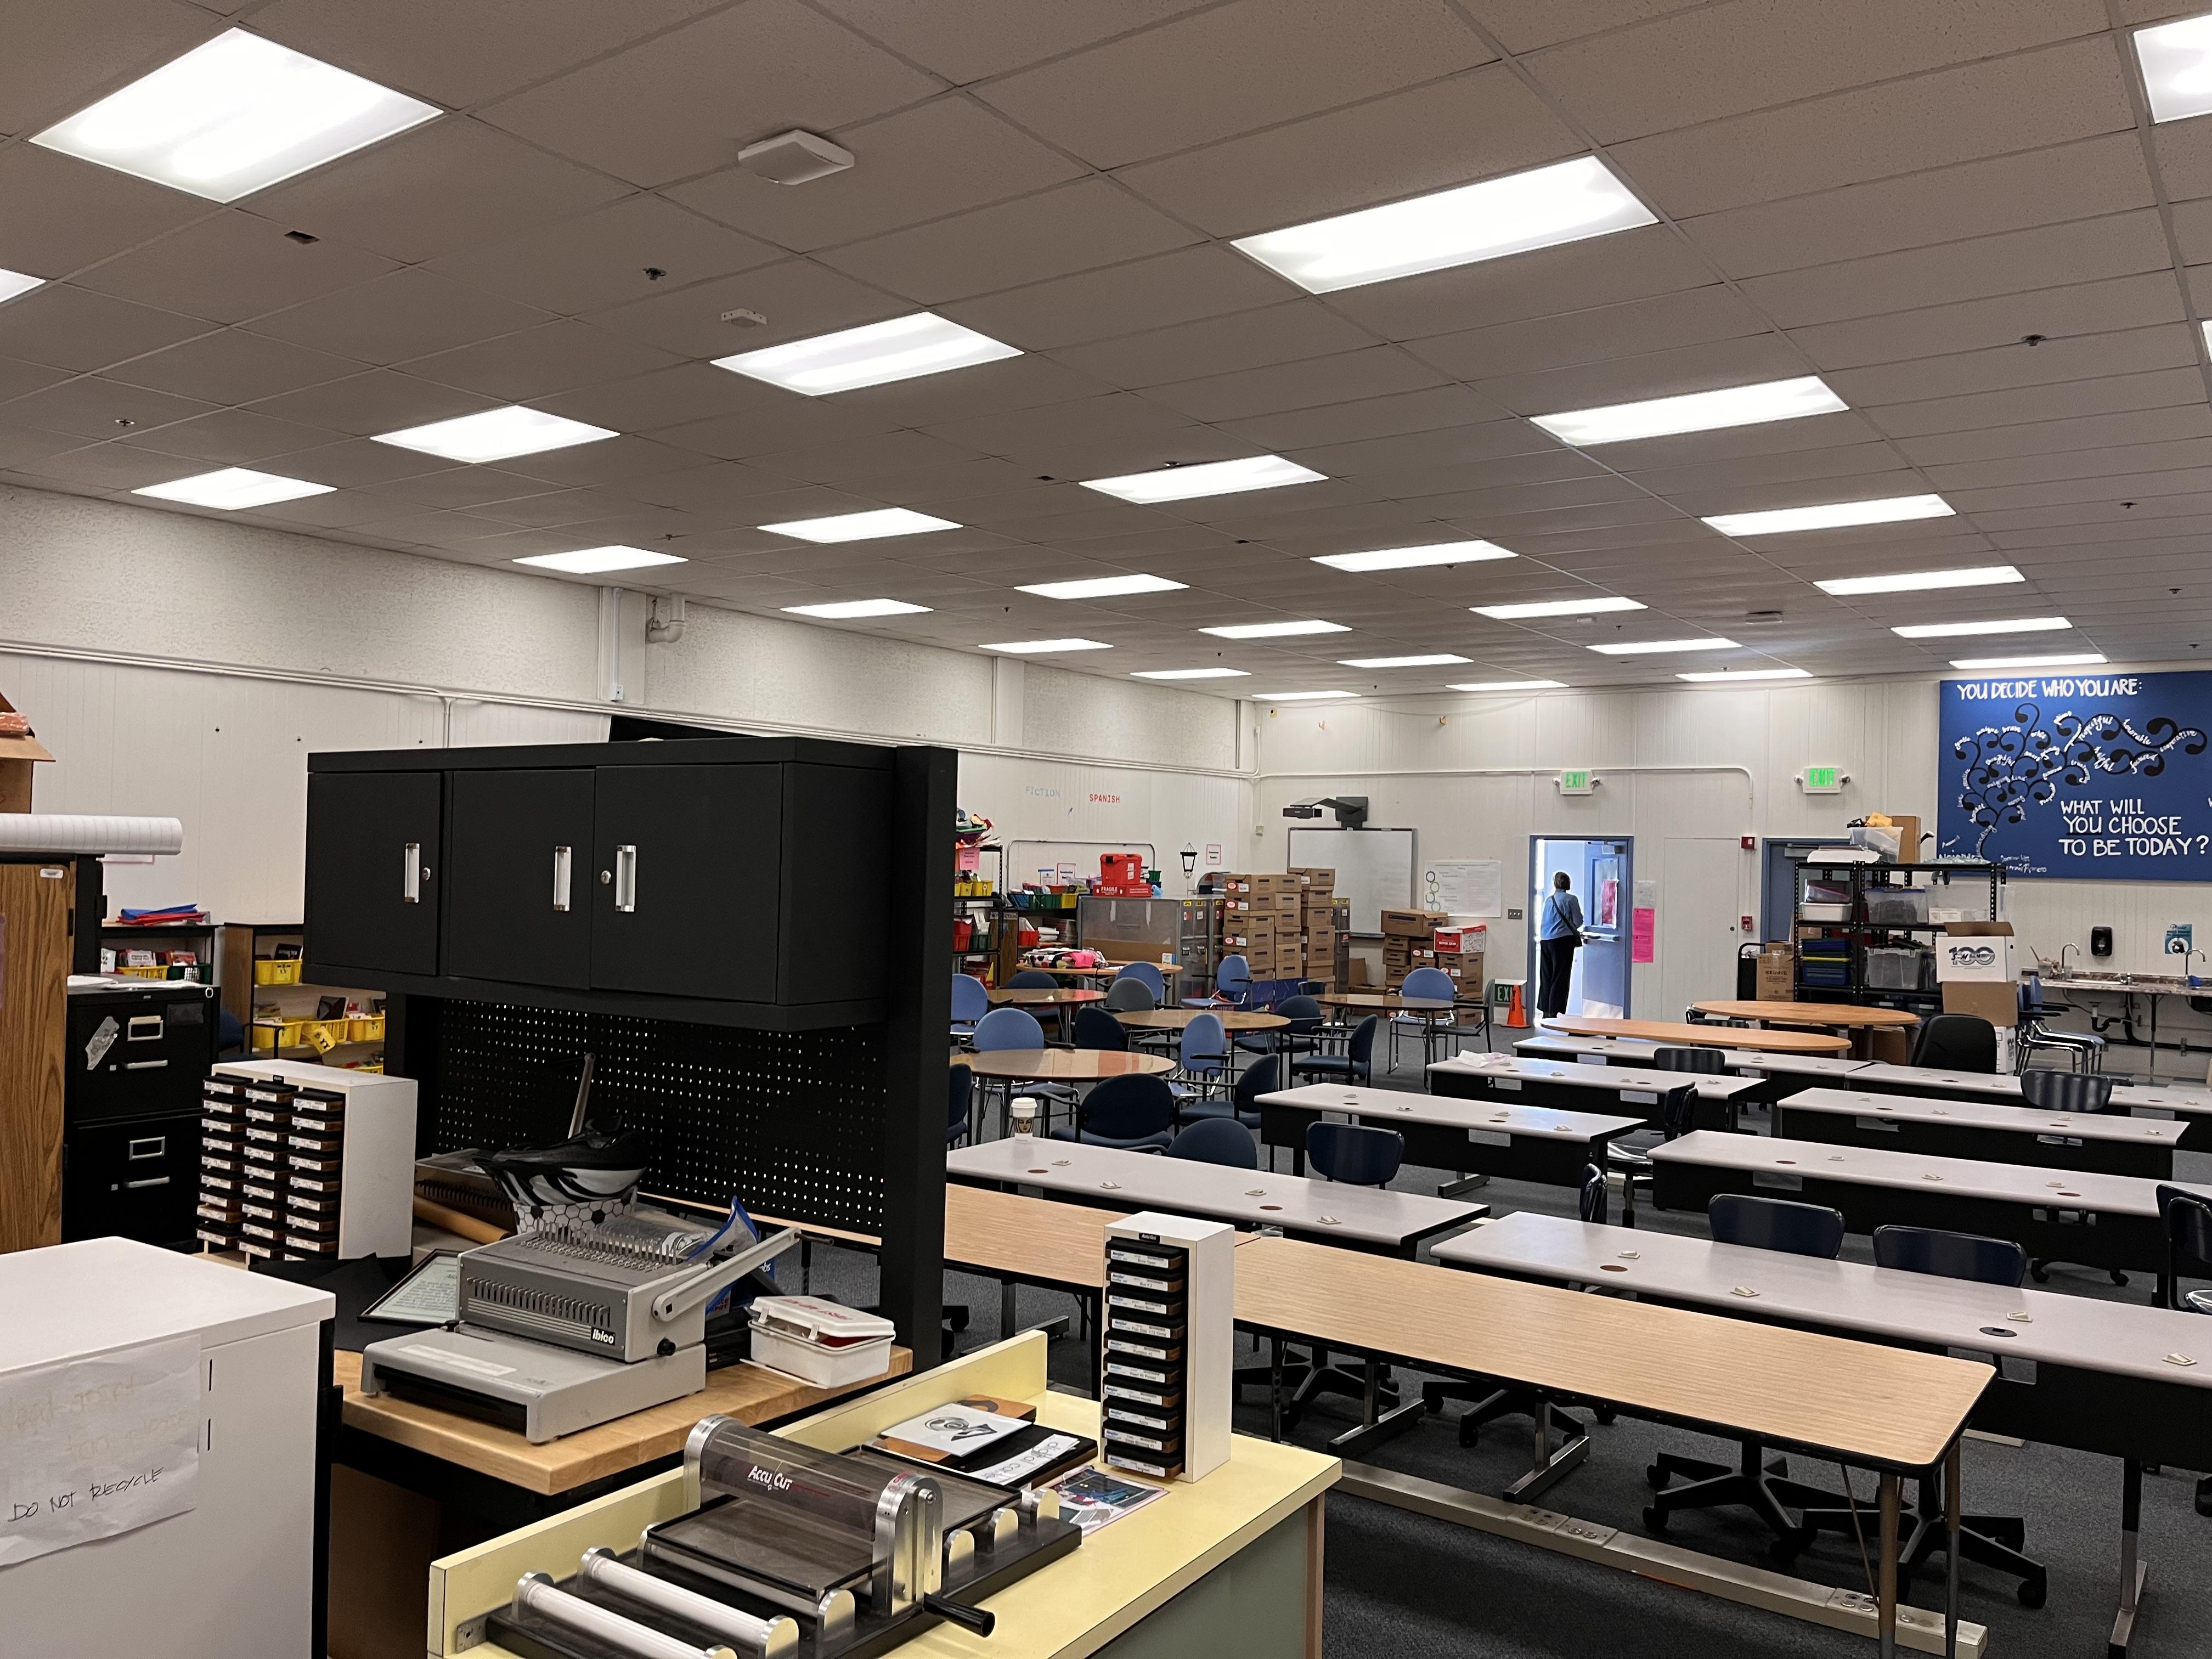 New STEM lab at Spruce Elementary (before)